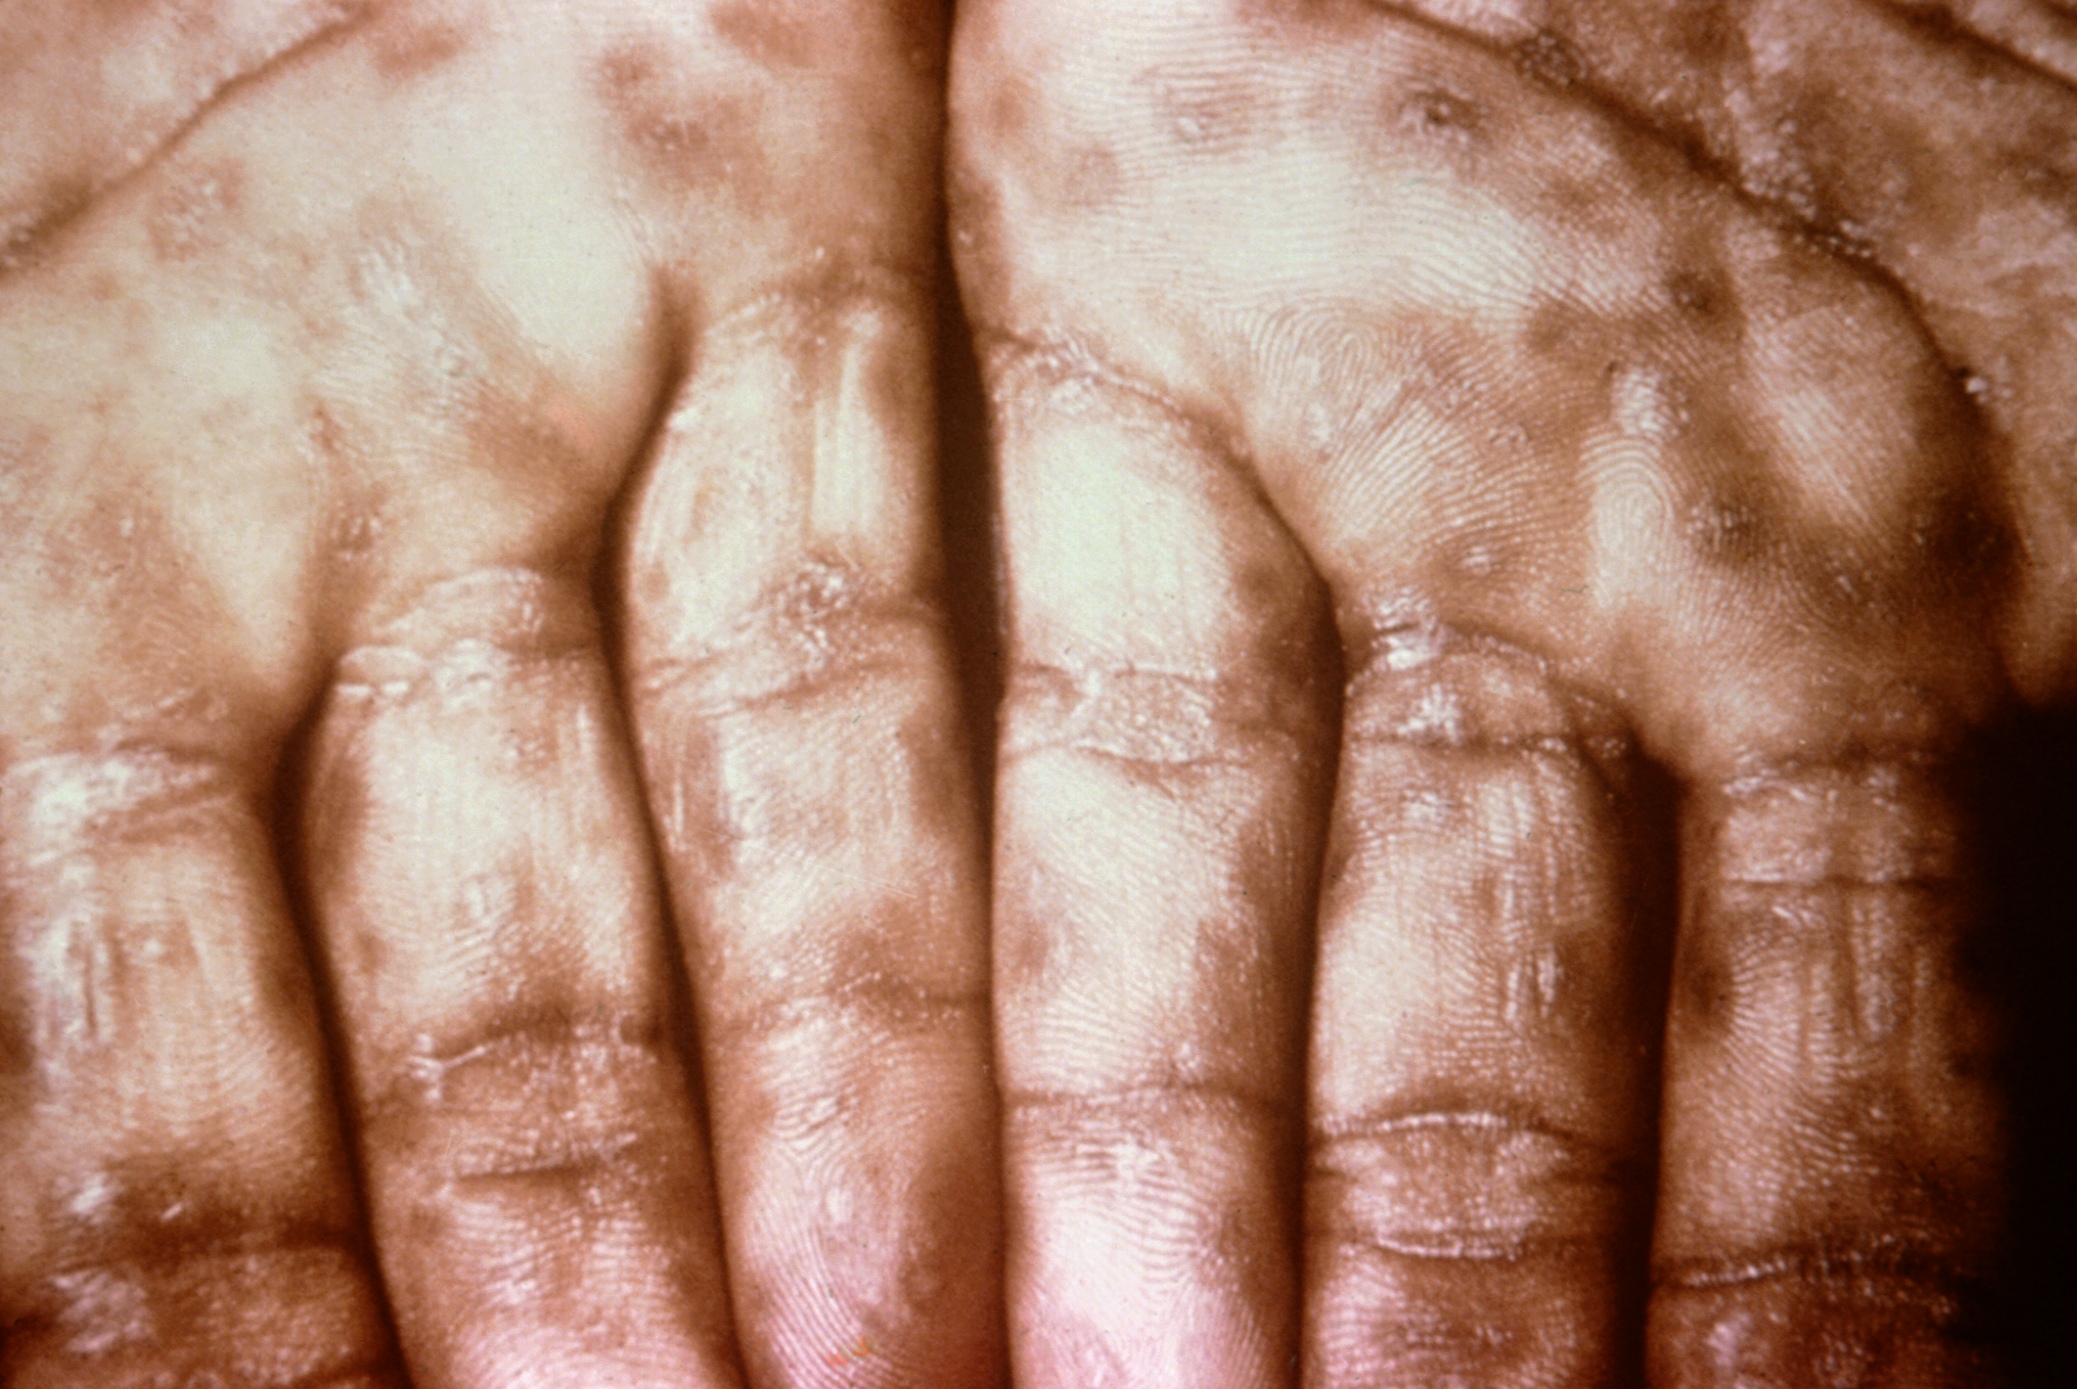 Typical presentation of secondary syphilis rash on the palms of the hands and usually also seen on soles of feet